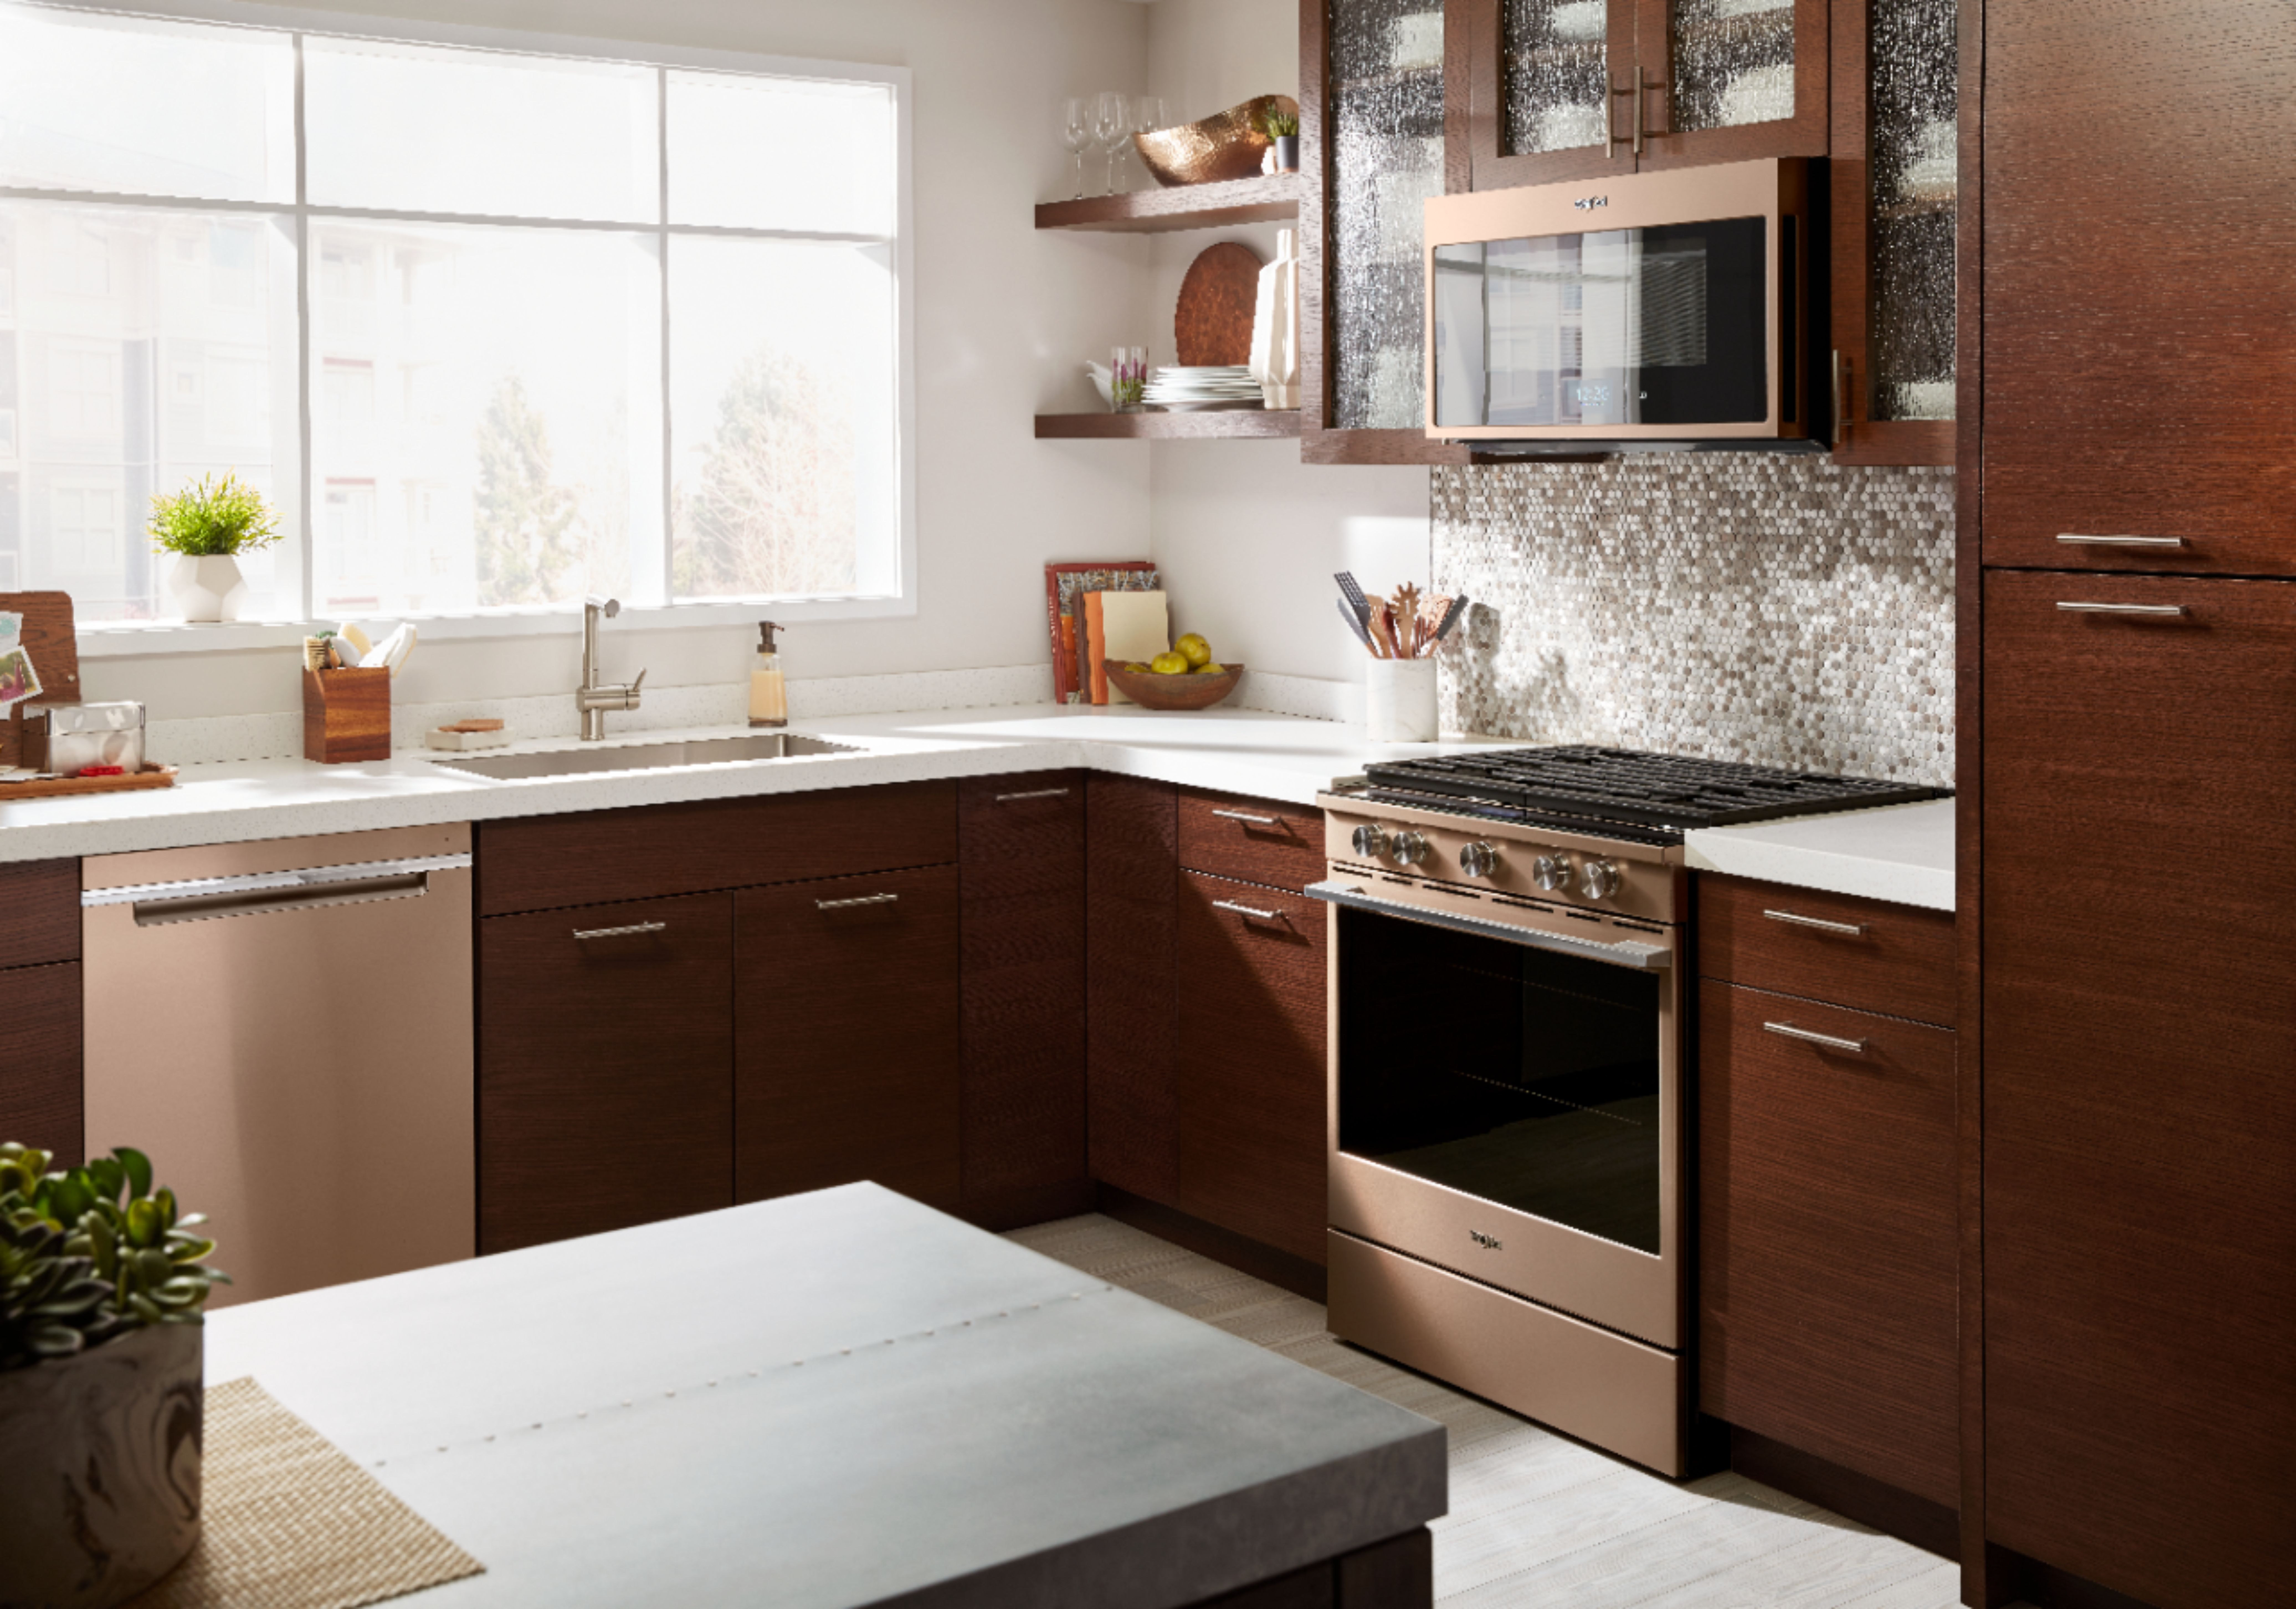 Make Holiday Entertaining Smarter & Easier with Whirlpool Smart Oven